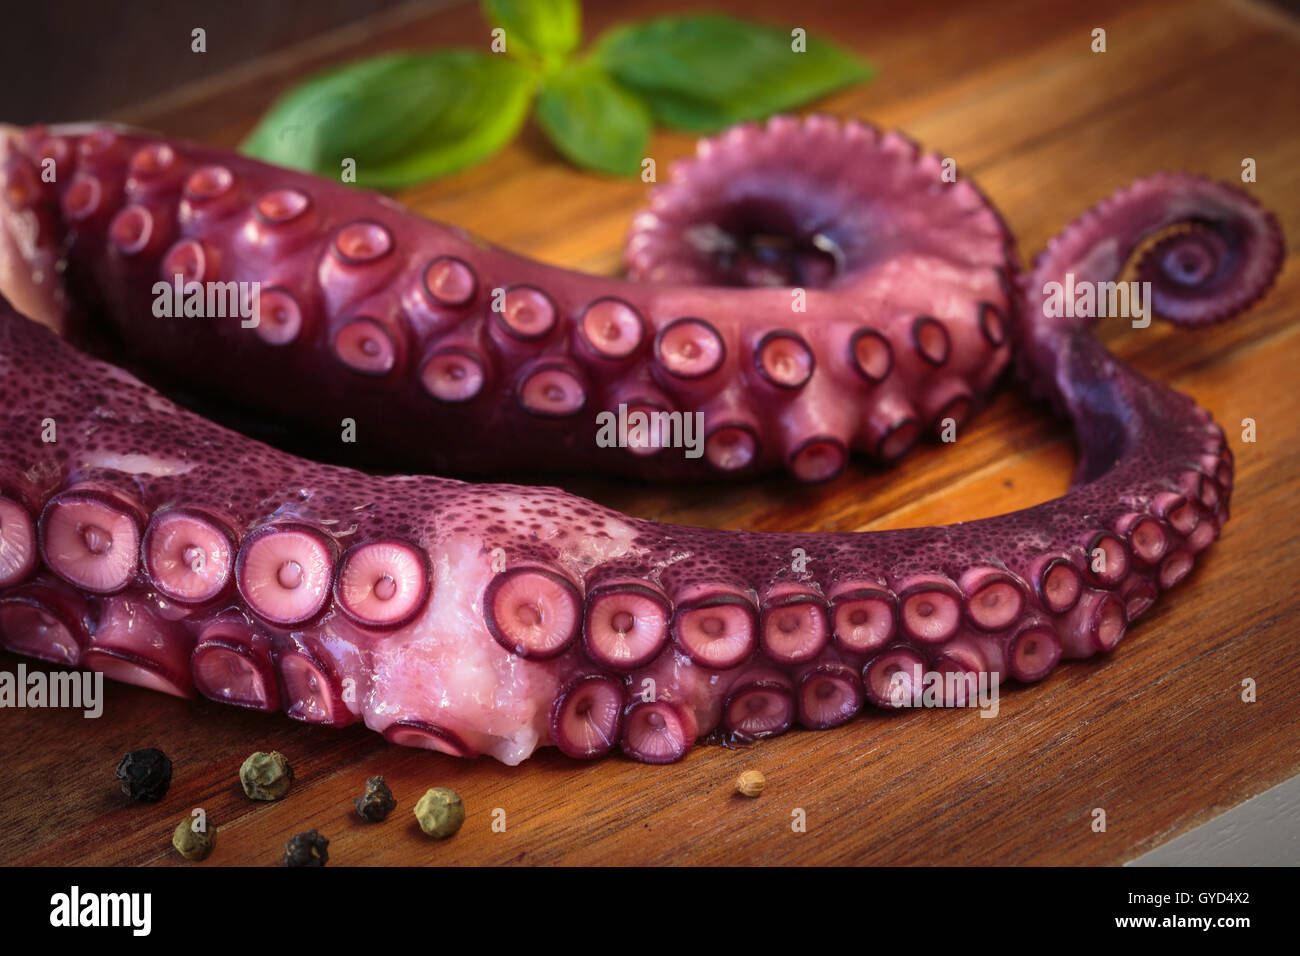 Delicious Cooked Octopus Tentacles On A Chopping Board Stock Photo Alamy,Valuable Bakelite Jewelry